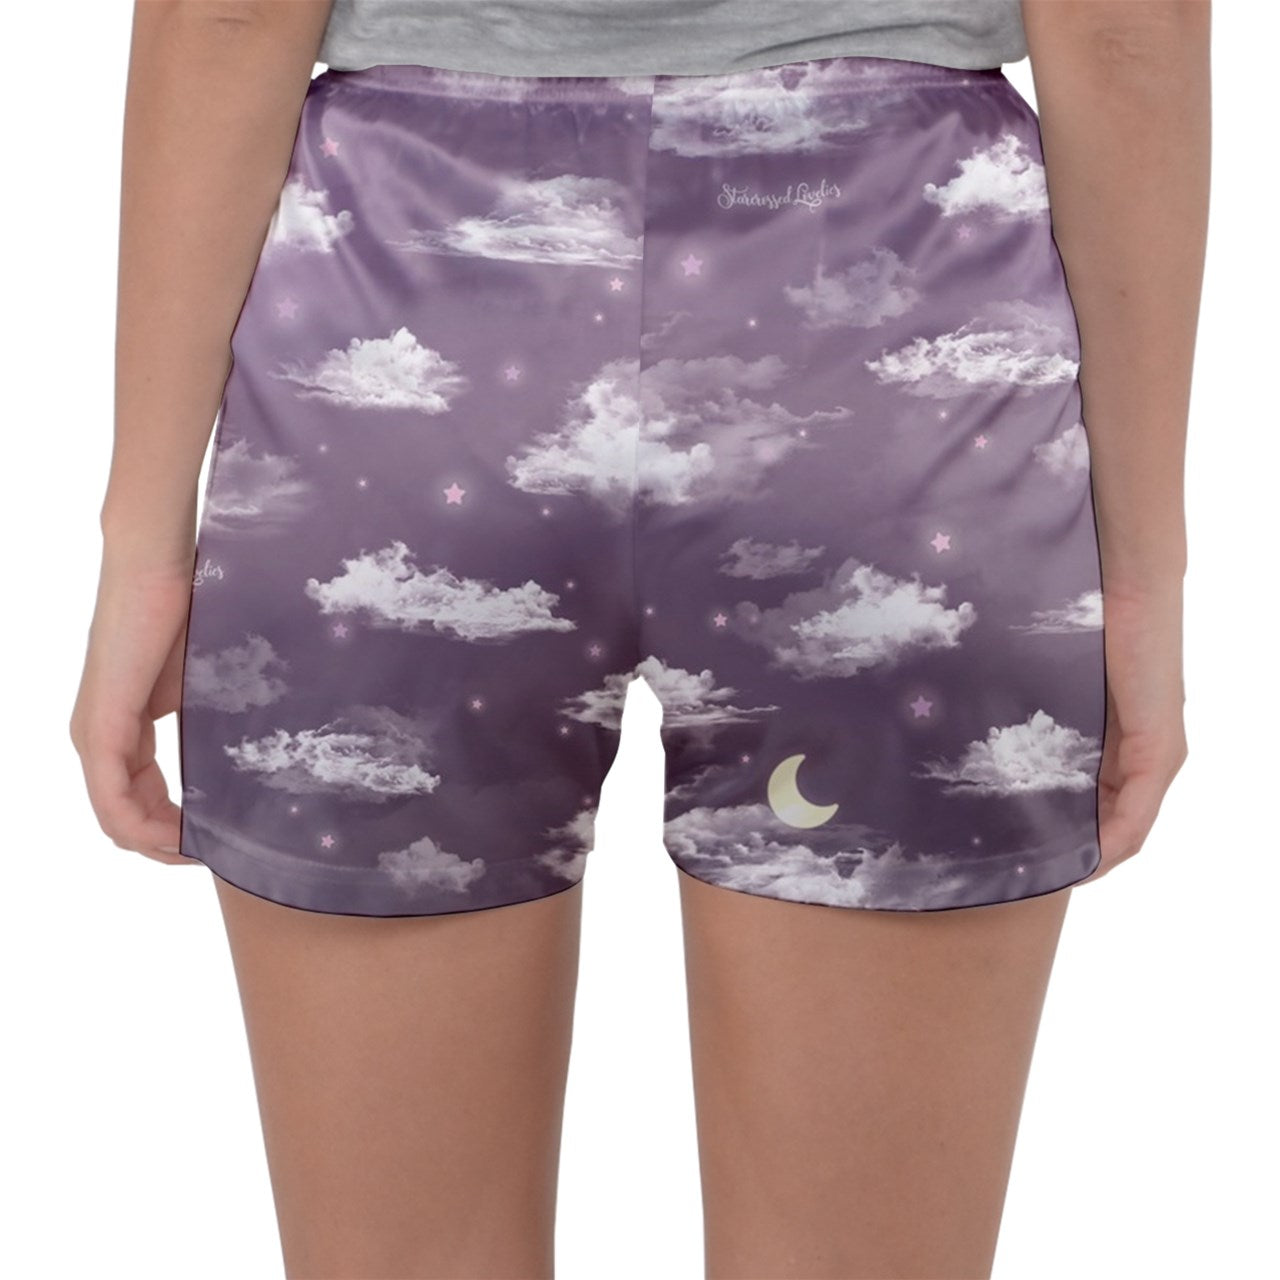 Dreamy Slumber Party Shorts After Dark - Lolita Collective